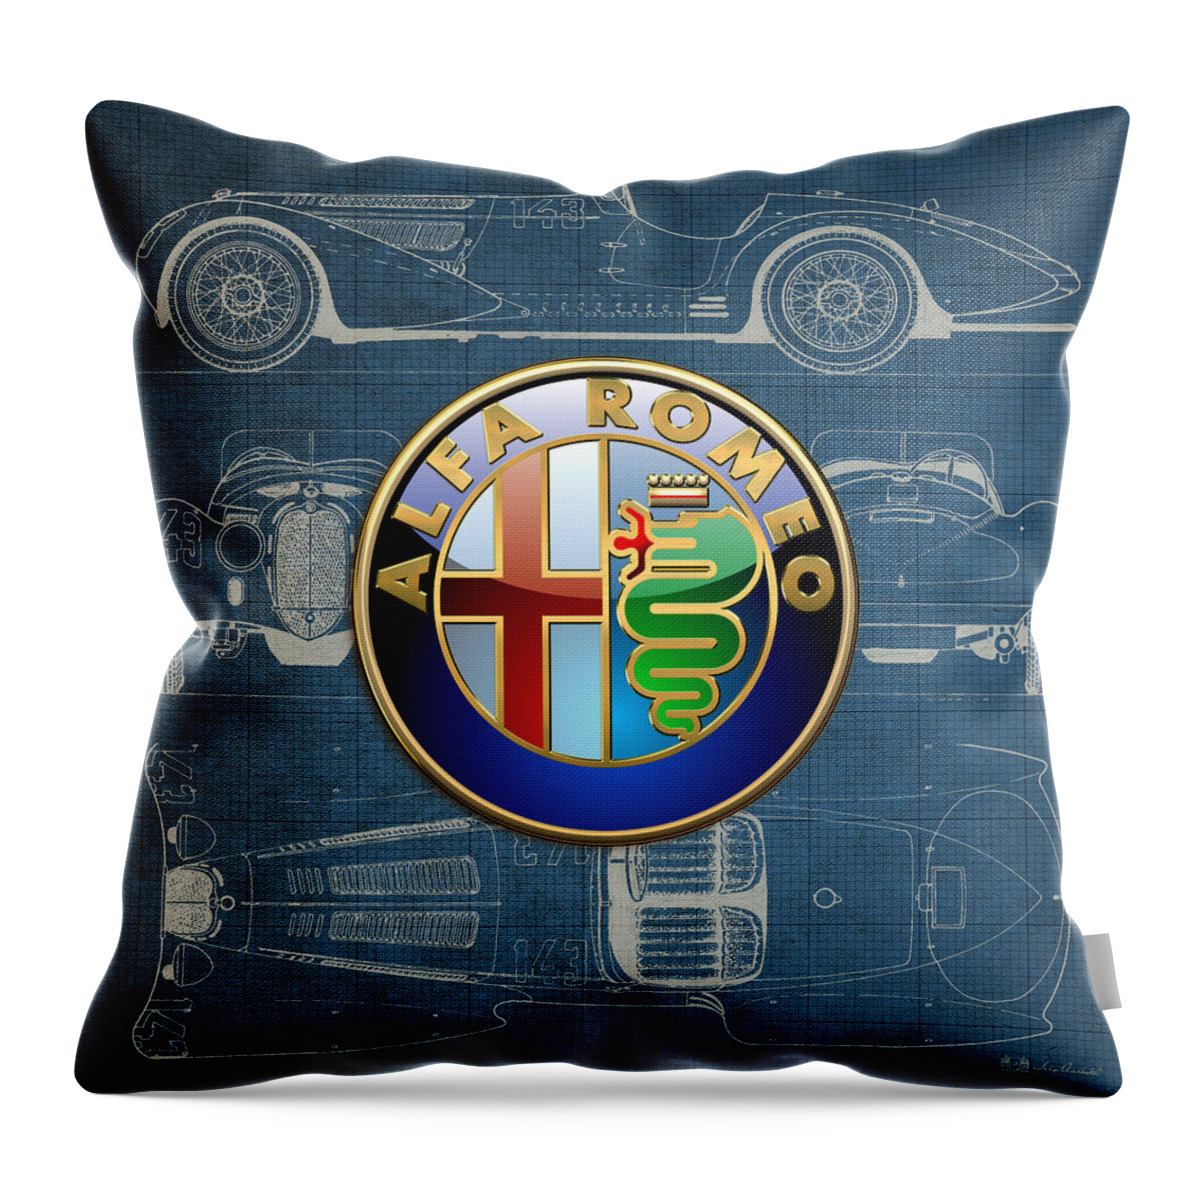 �wheels Of Fortune� By Serge Averbukh Throw Pillow featuring the photograph Alfa Romeo 3 D Badge over 1938 Alfa Romeo 8 C 2900 B Vintage Blueprint by Serge Averbukh